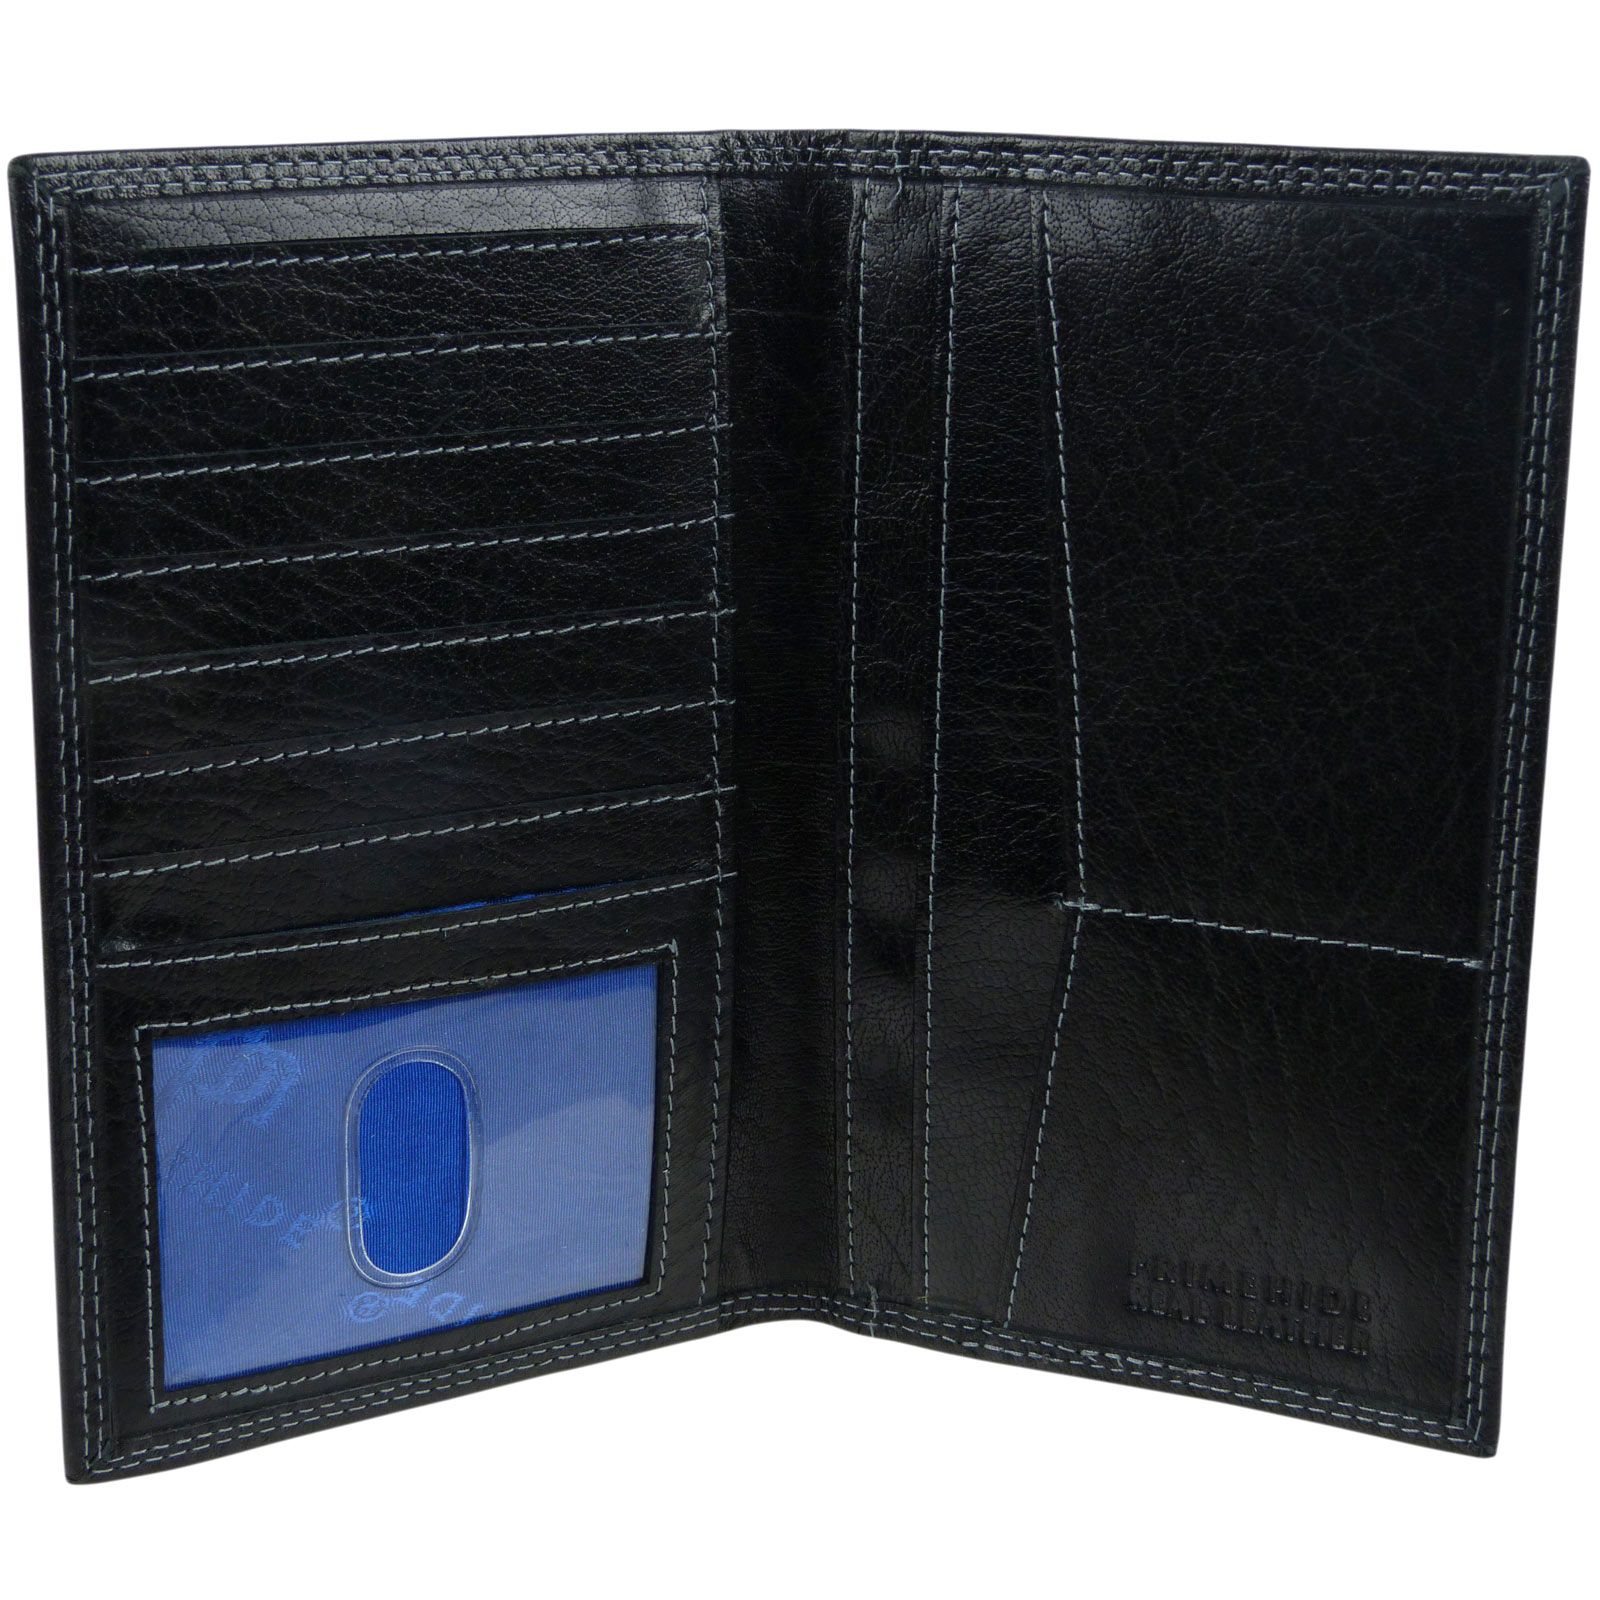 Mens Gents Stylish Top Quality Suit Wallet Leather by Prime Hide RFID ...